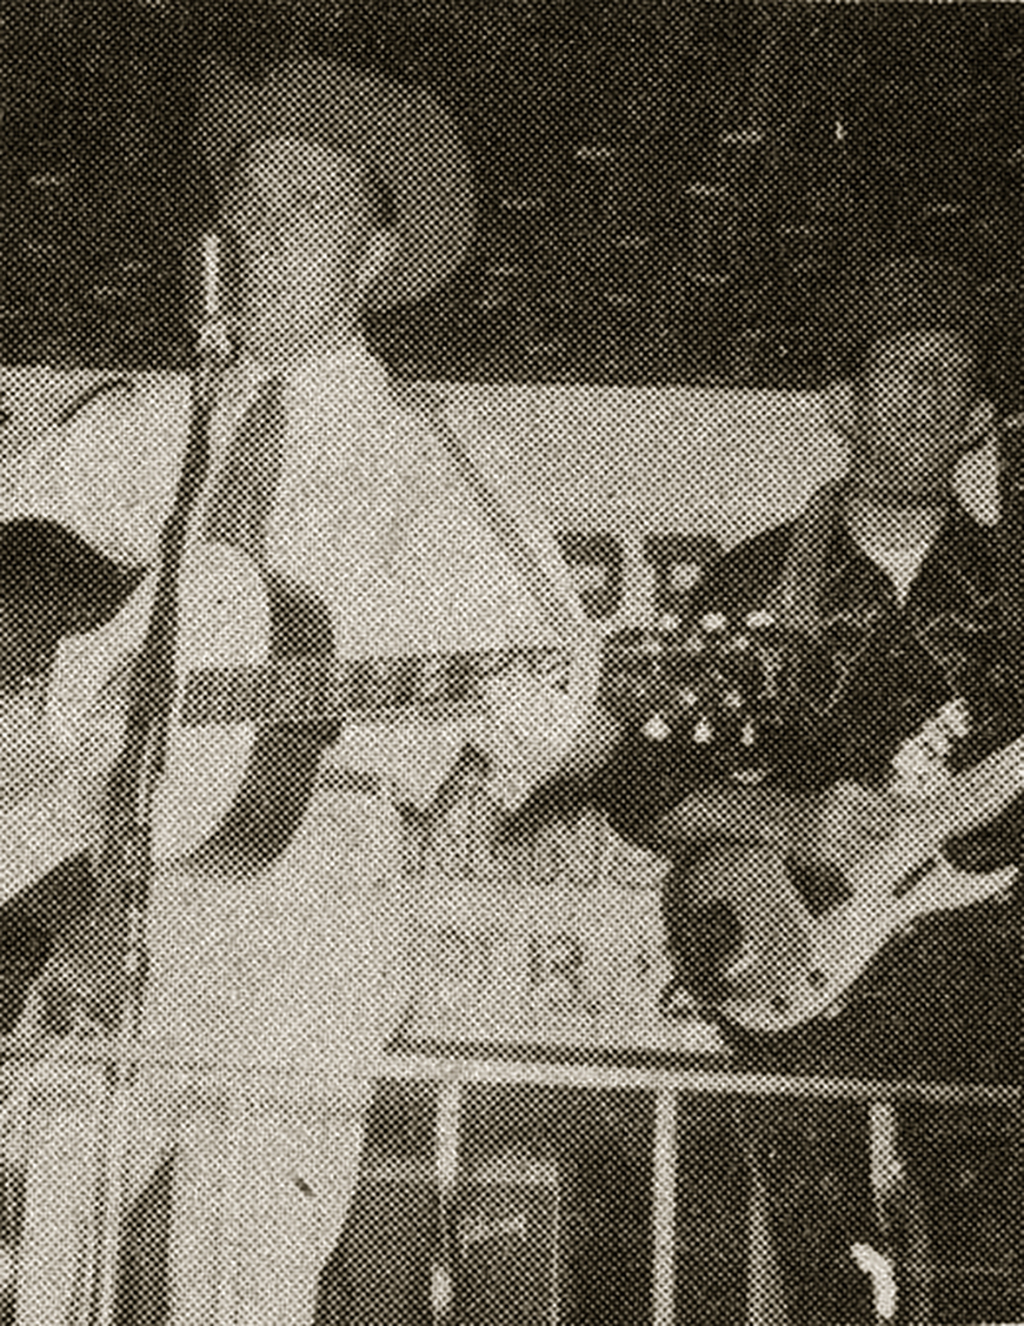 Jimmy Williams and Jeff Stark on stage, 1968